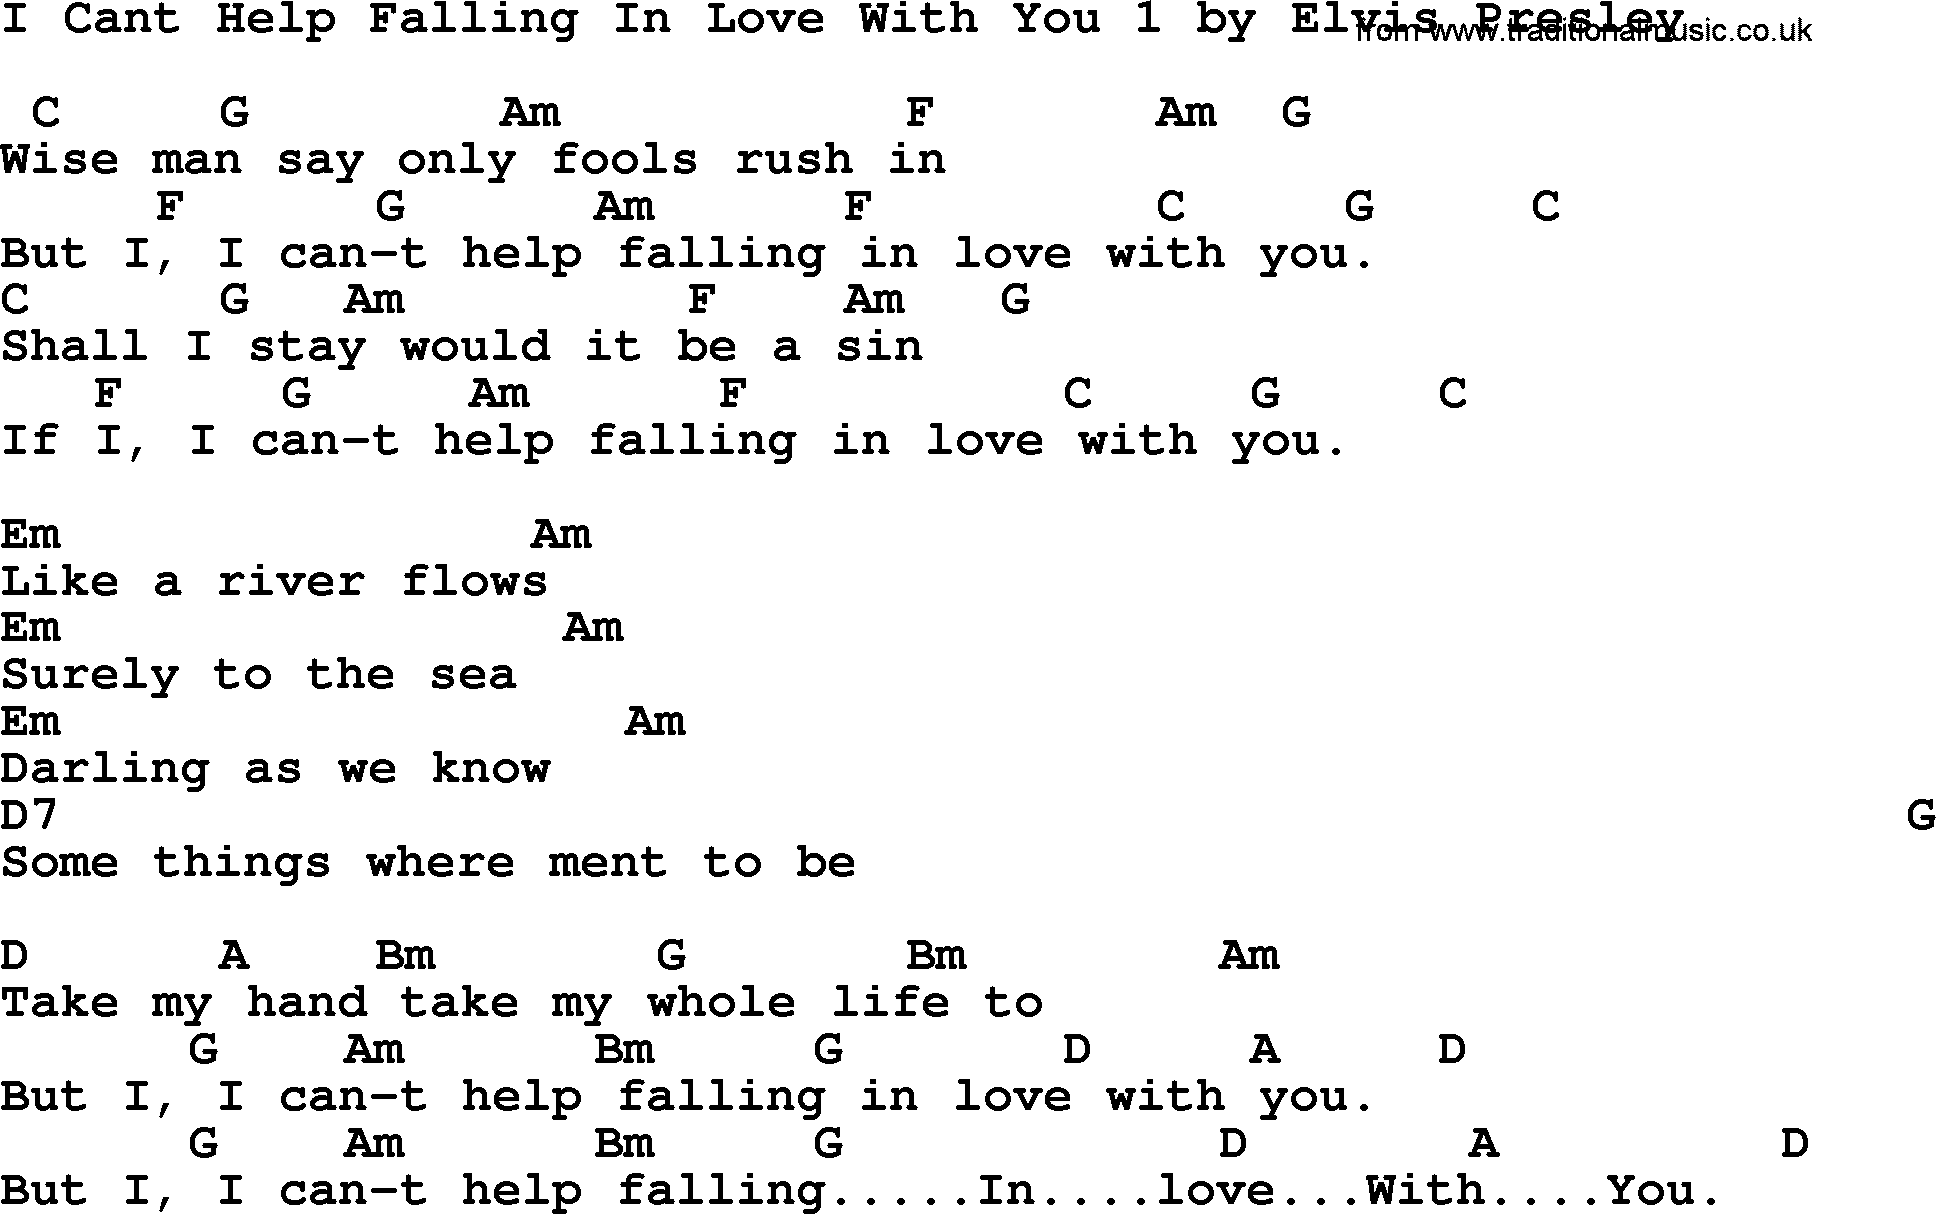 Elvis Presley song: I Cant Help Falling In Love With You 1, lyrics and chords